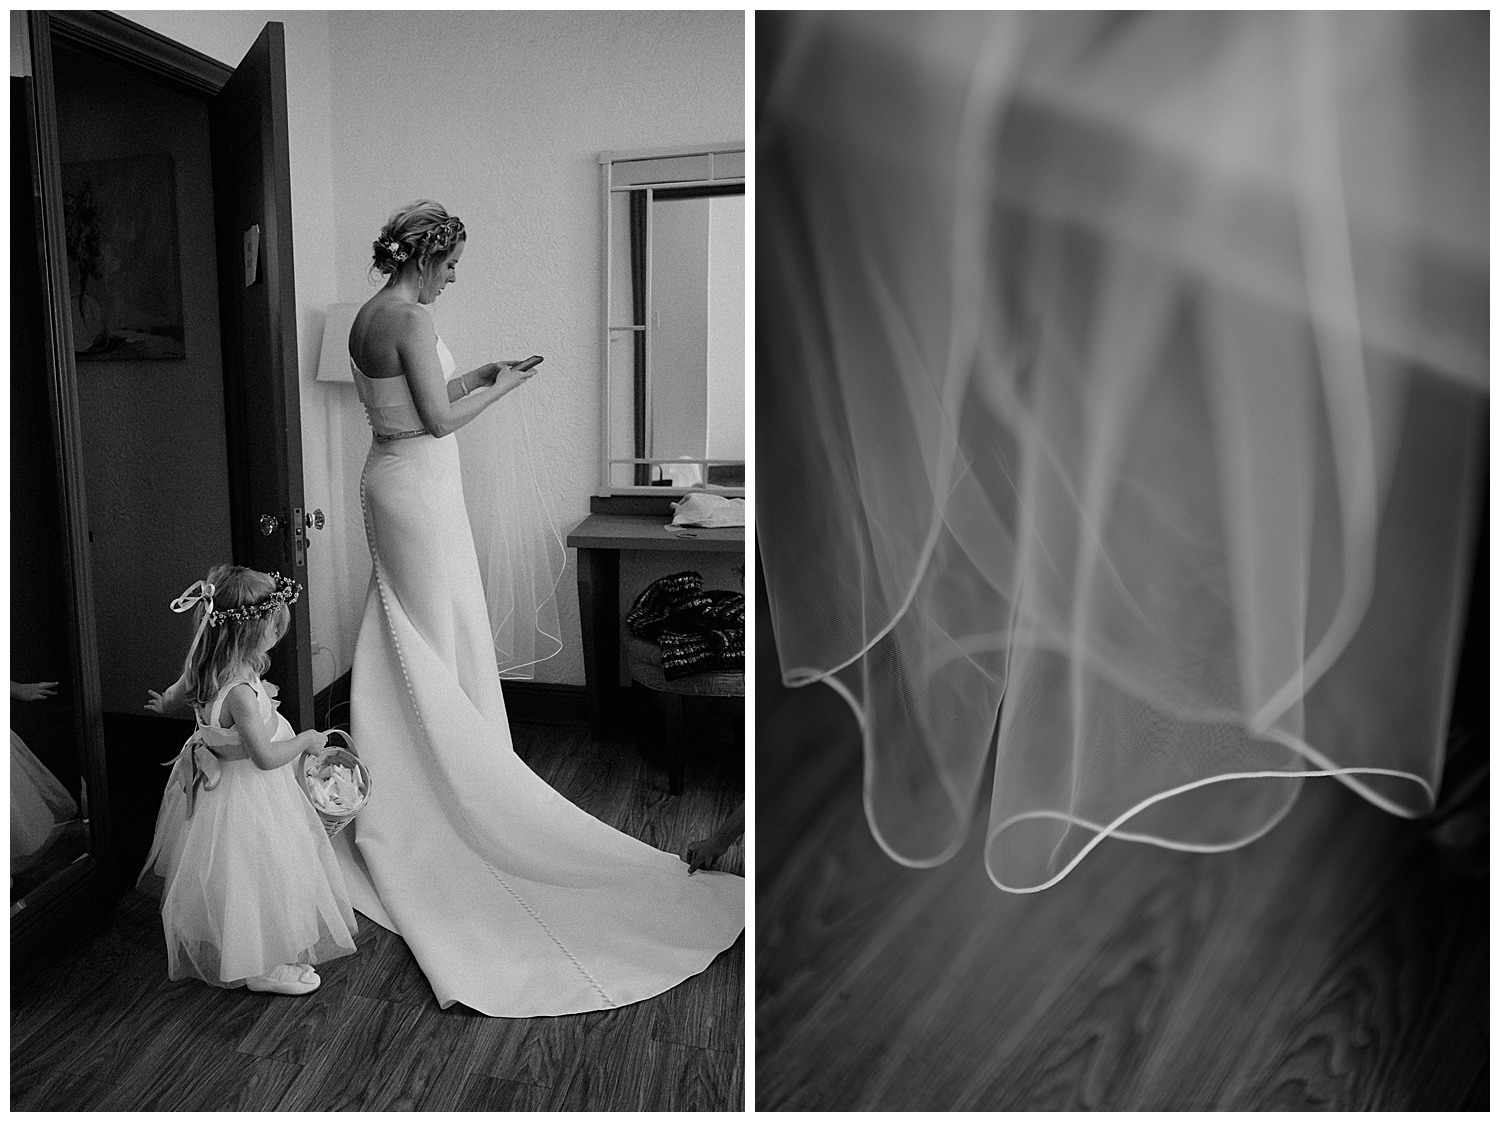 In the photo on the left a beautiful flower girl in the specs to brides dress and the photo on the right shows a close-up of the veil